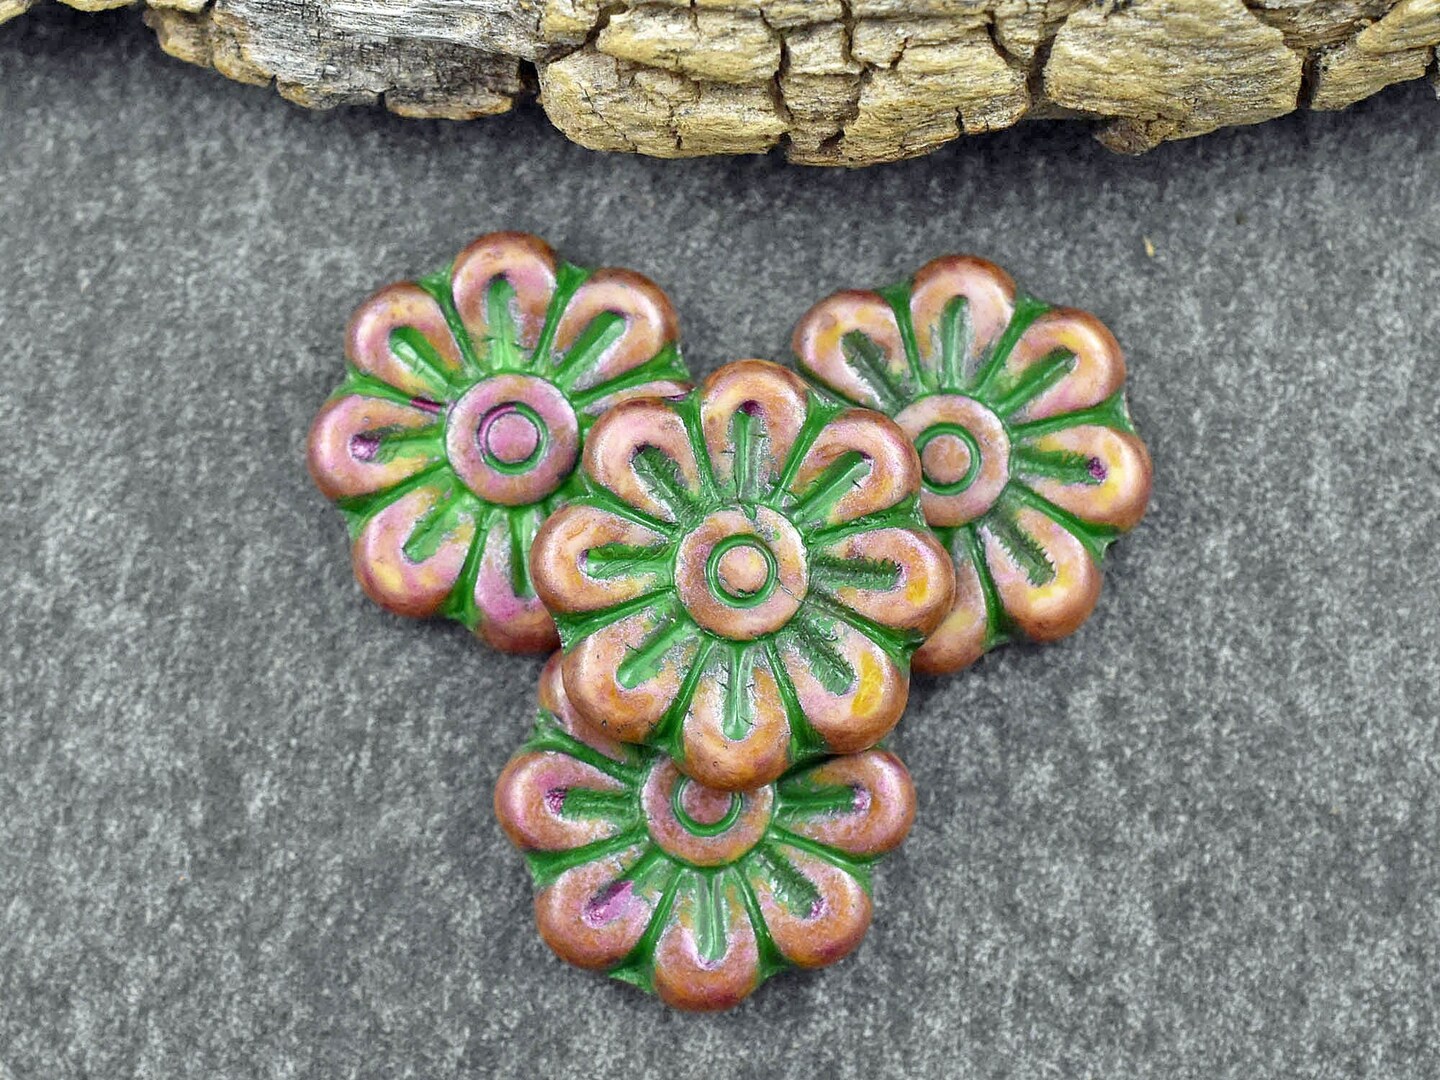 *6* 18mm Green Washed Rose Pink Alabaster Daisy Flower Beads